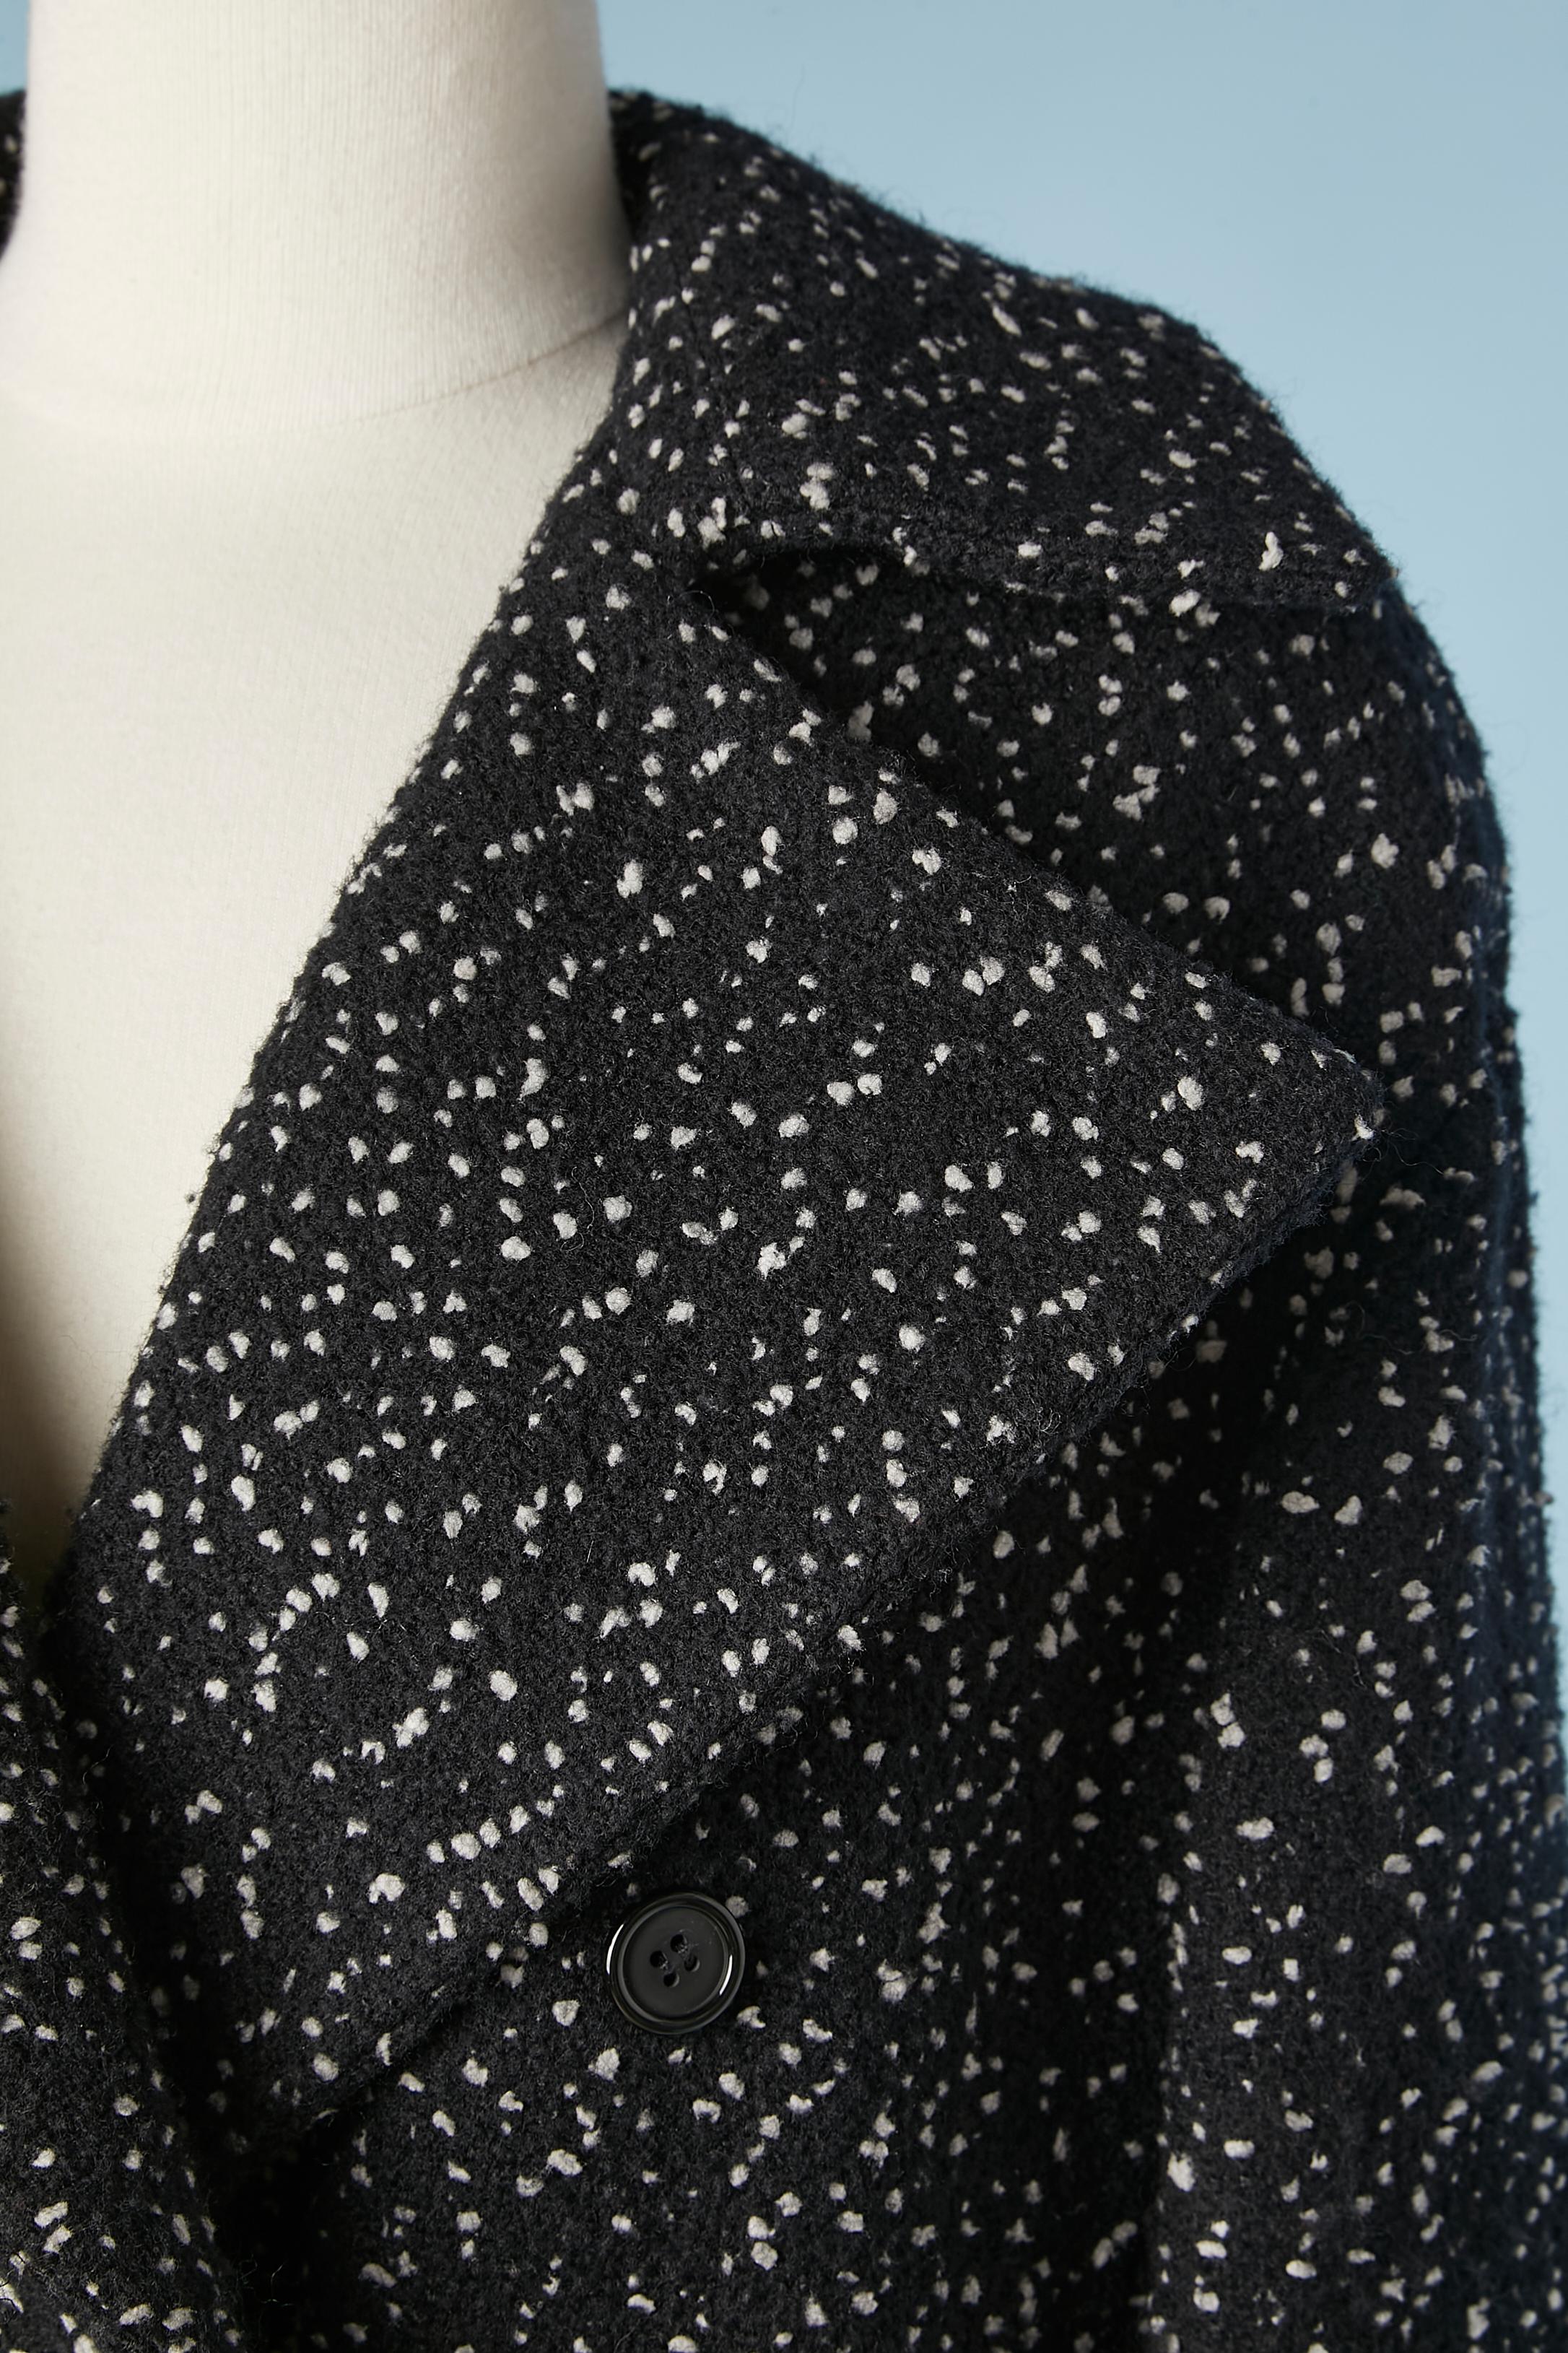 Double-breasted  wool coat black speckled white. Fabric composition: 81% wool, 5% polyester, 13% polyamide, 1% elastane. Silk lining inside the pockets, the sleeves and inside shoulders. 
SIZE XL 